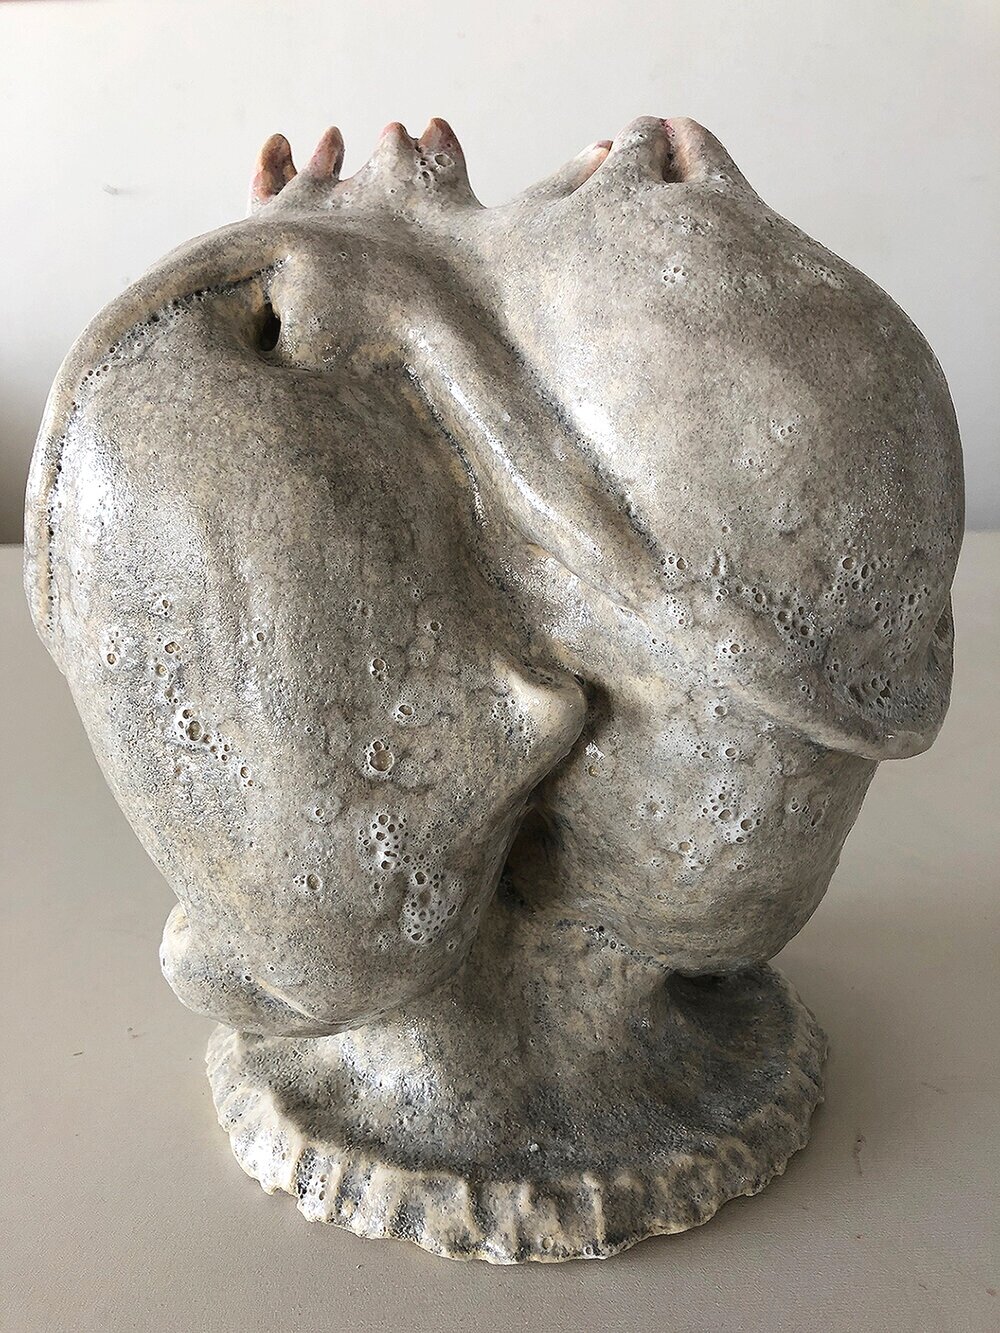   After You , 2020 Clay, glaze 10” x 8”  